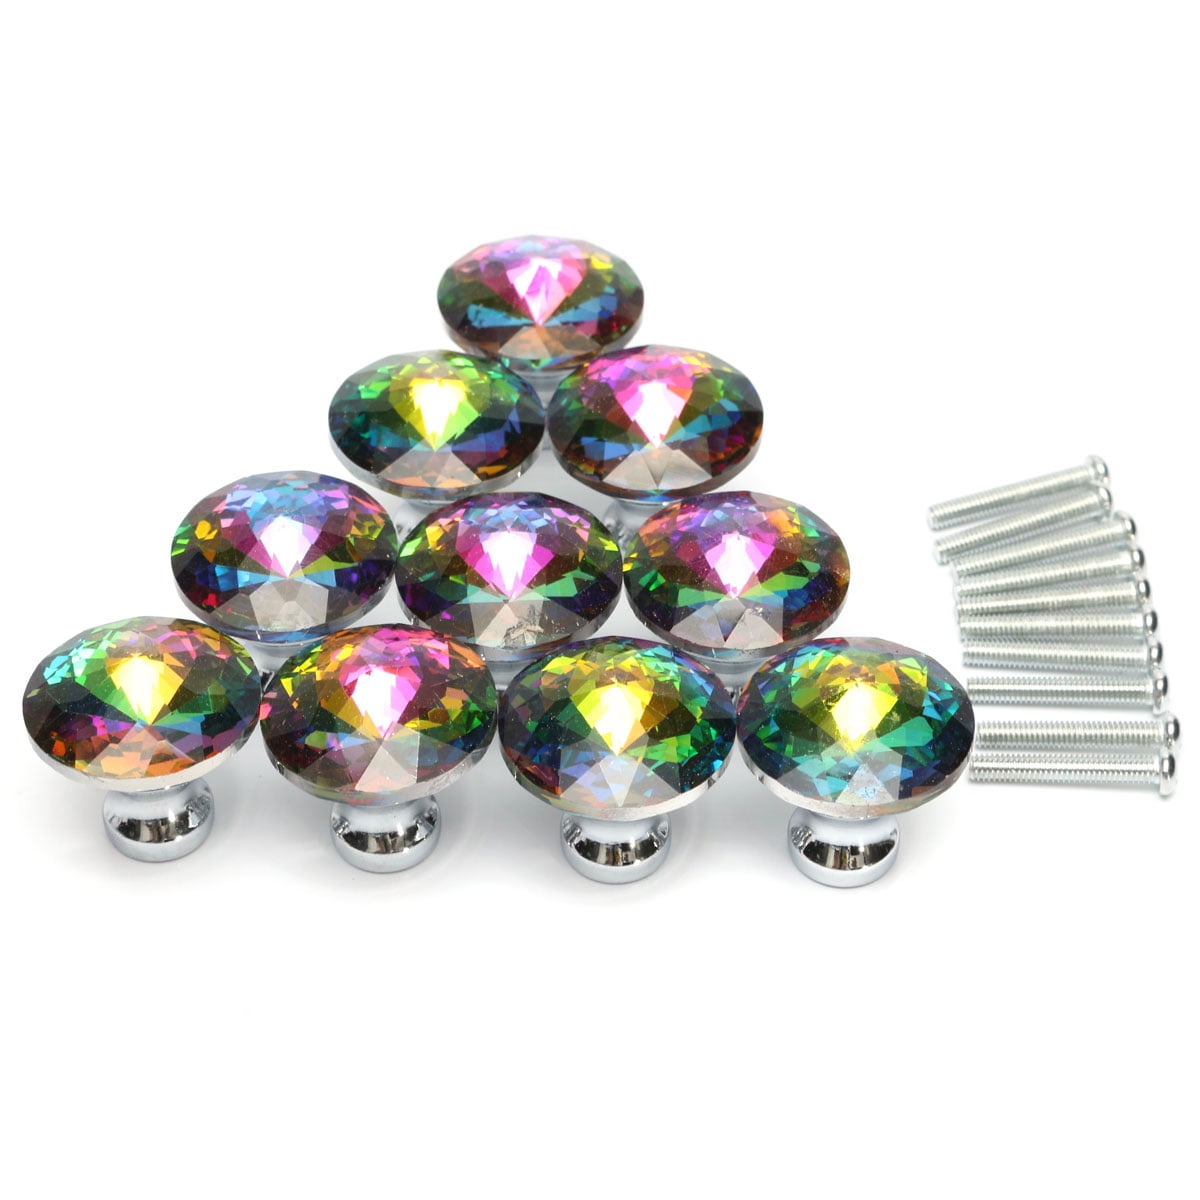 Meigar 10pcs 30mm Colorful Crystal Glass Cabinet Knobs Diamond